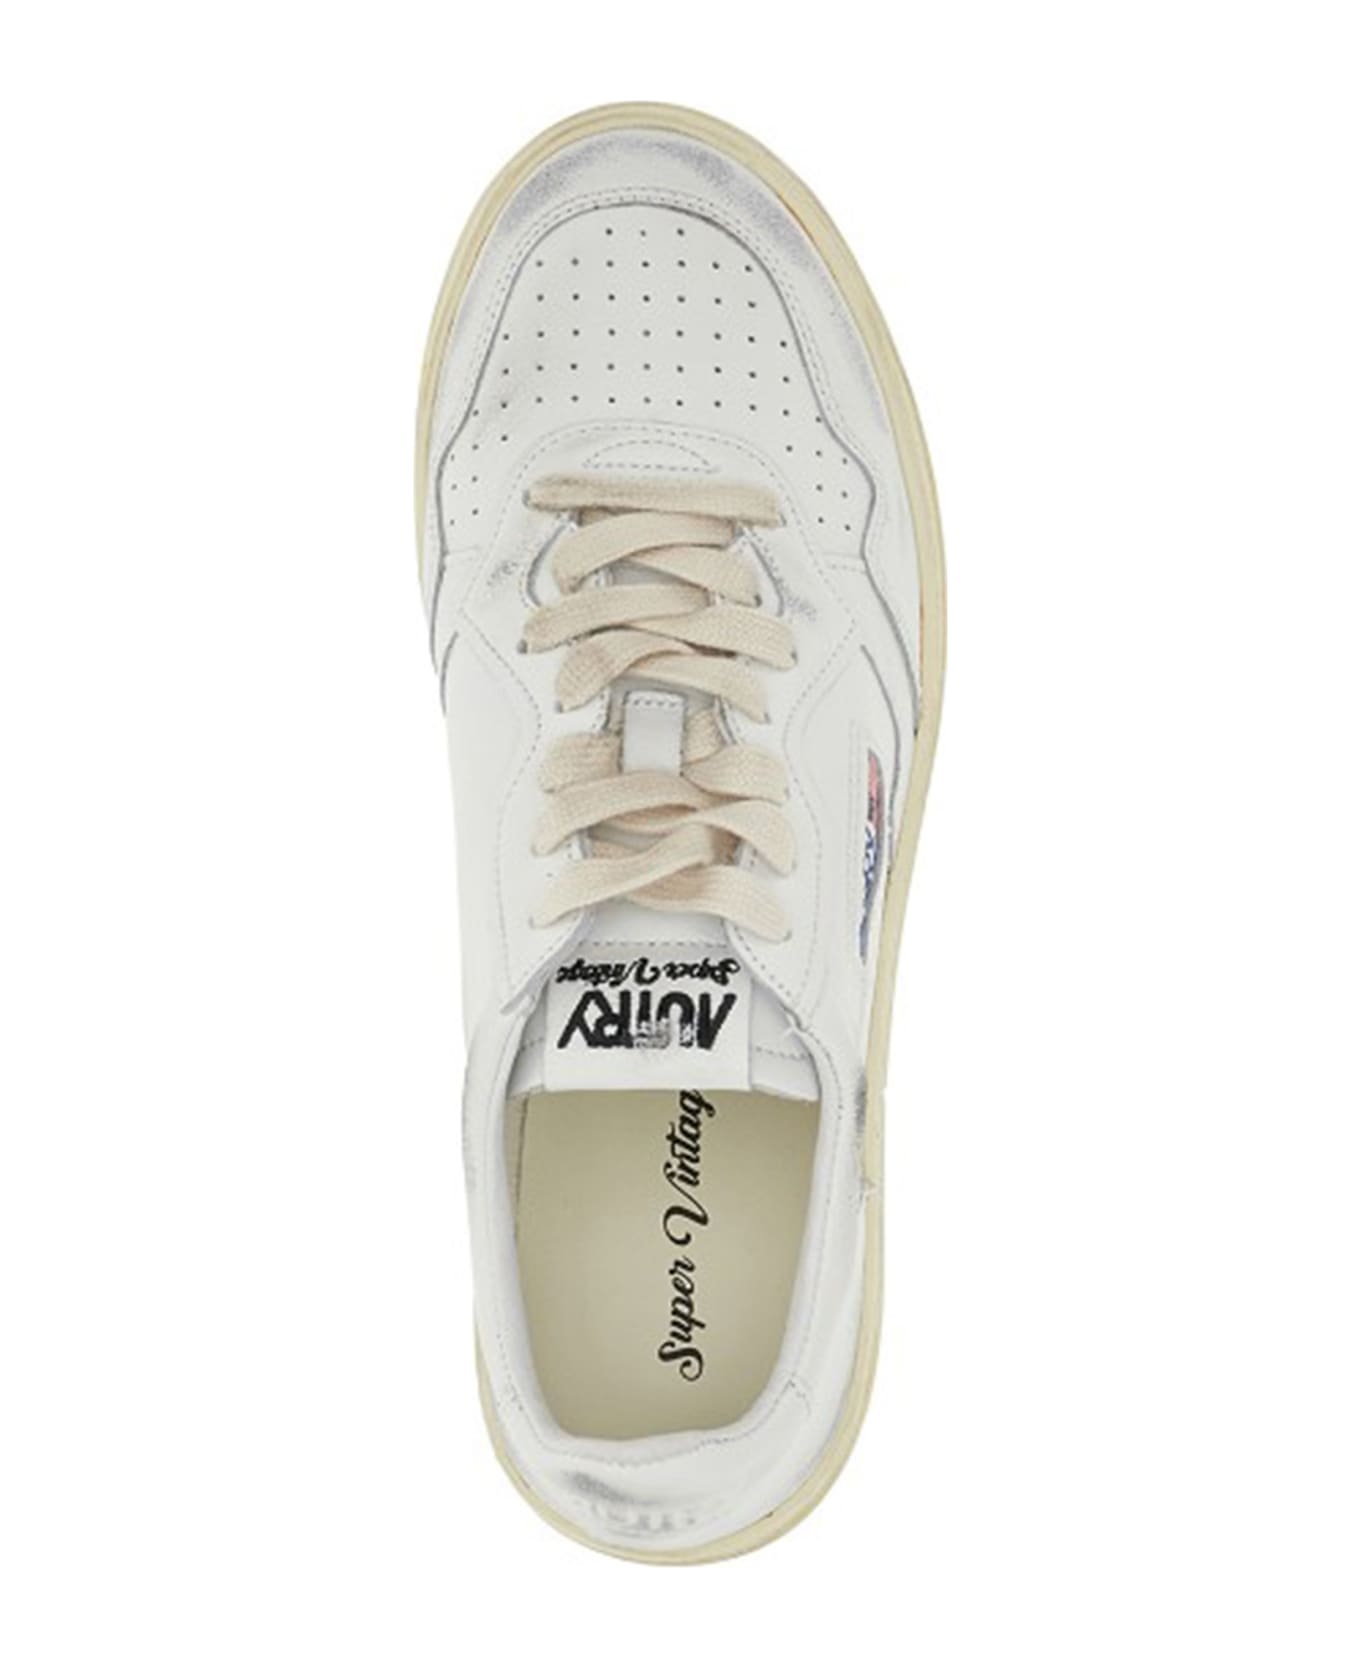 Autry Super Vintage Low Sneakers - White